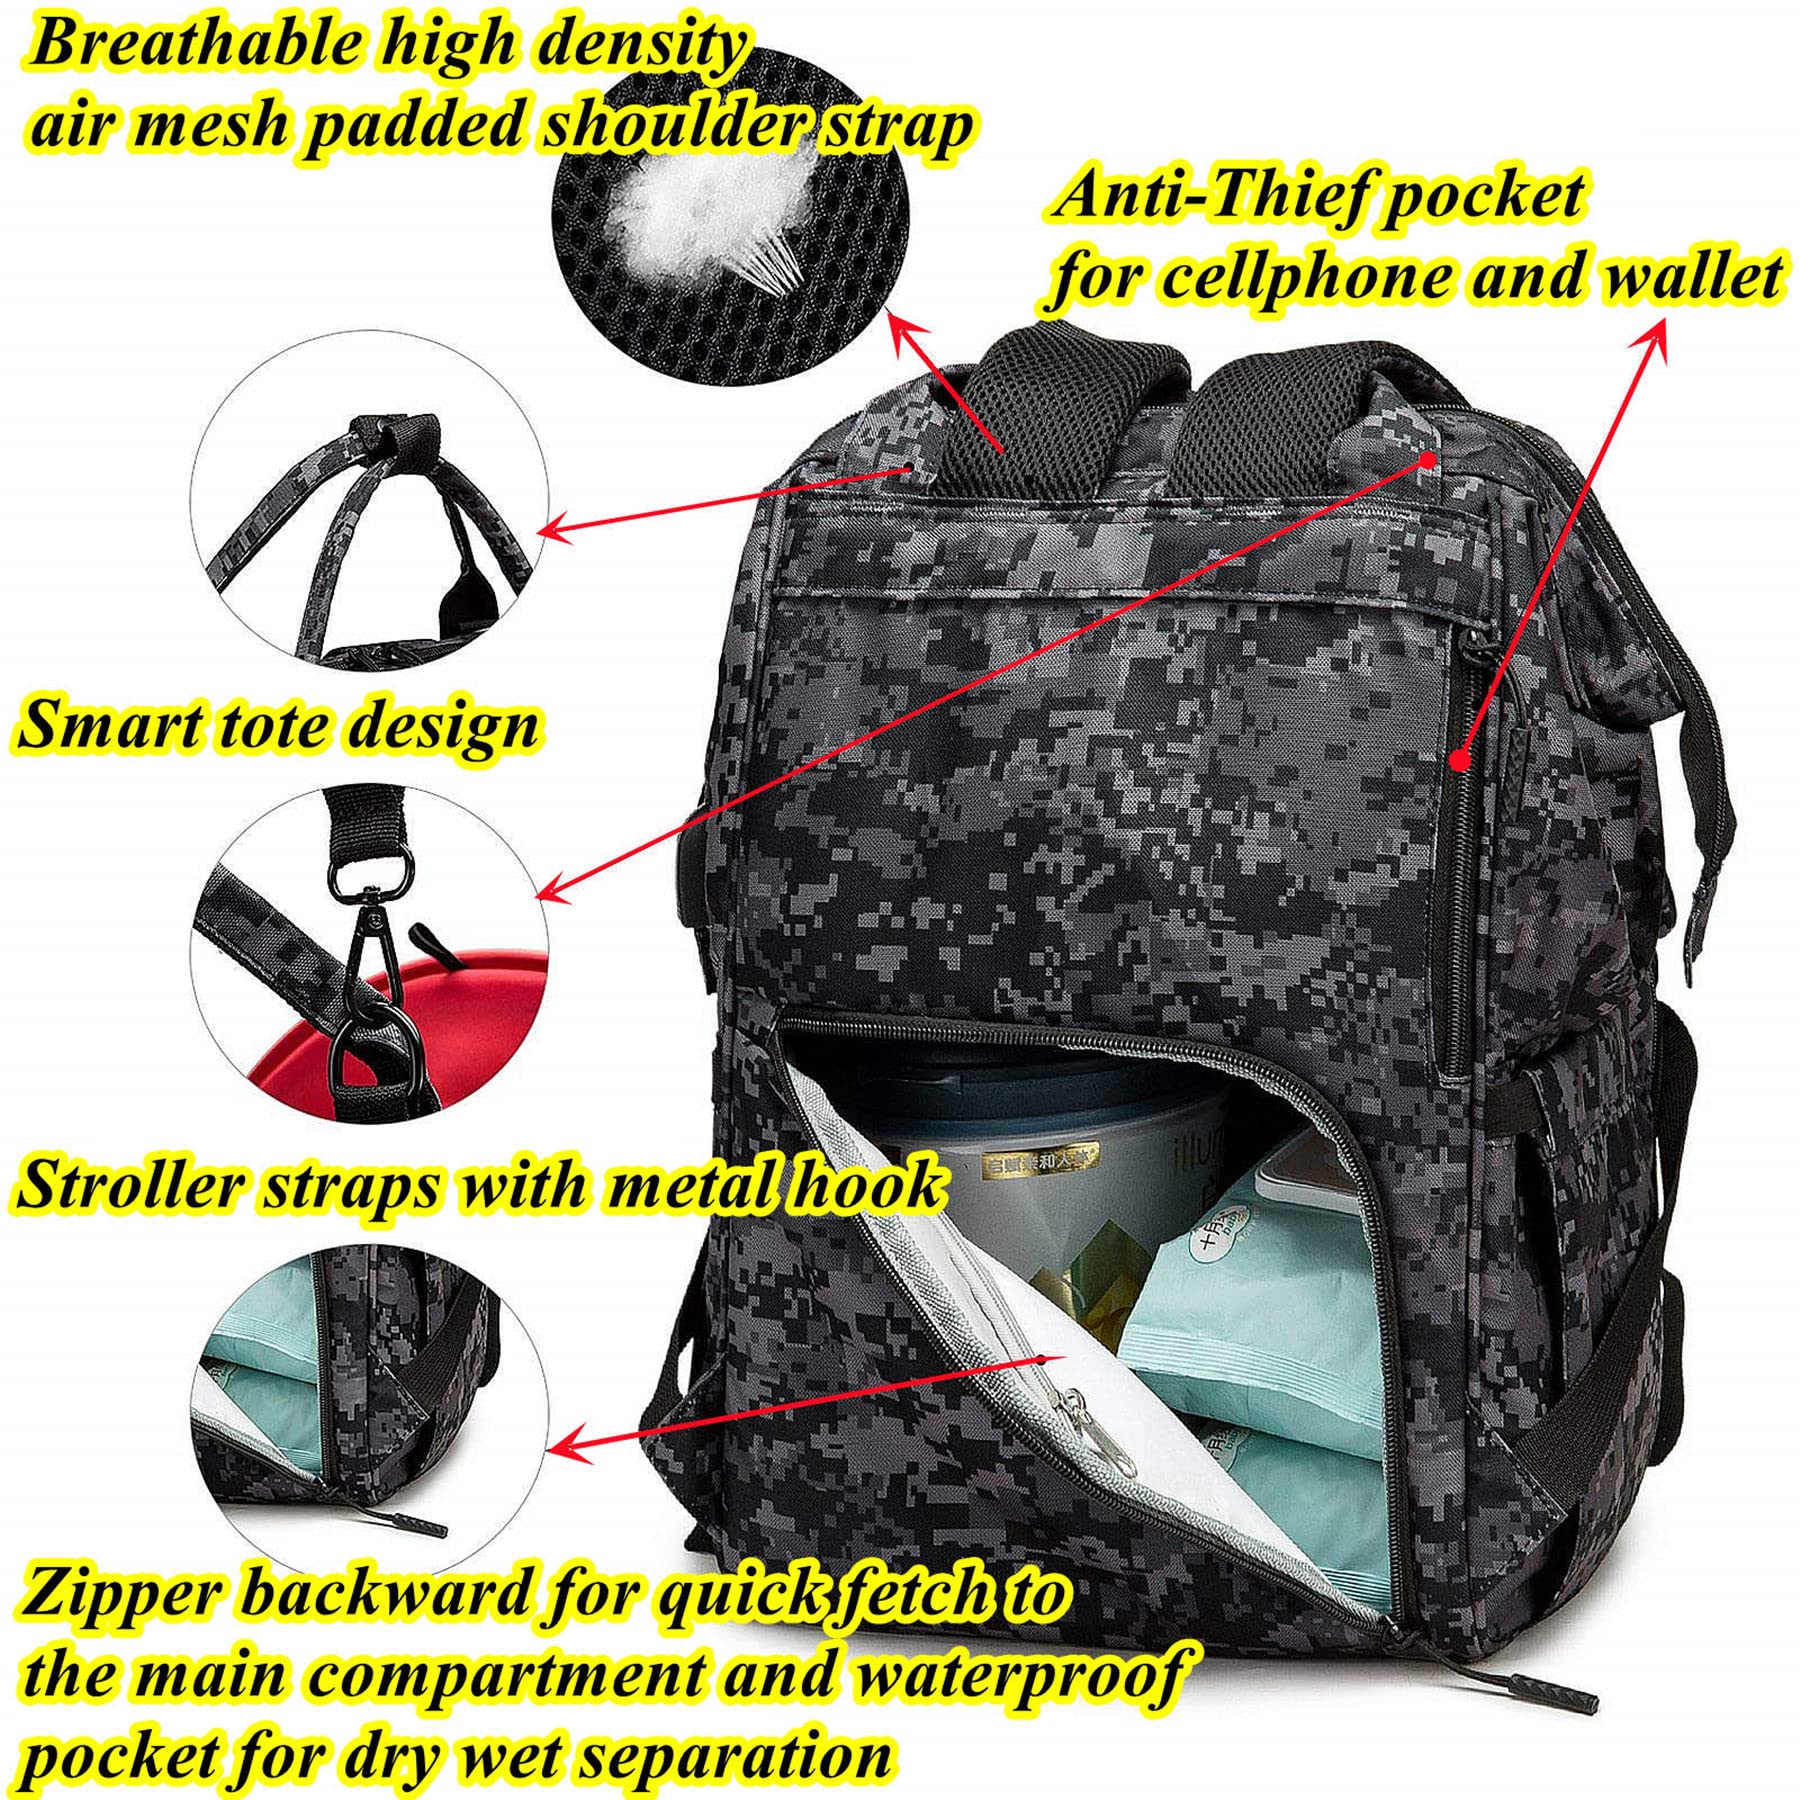 QWREOIA Camo Diaper Bag Backpack with USB Charging Port Stroller Straps and Insulated Pocket,army military Travel Nappy Backpack for Dad/Mom (DADDY and MOMMY patches)